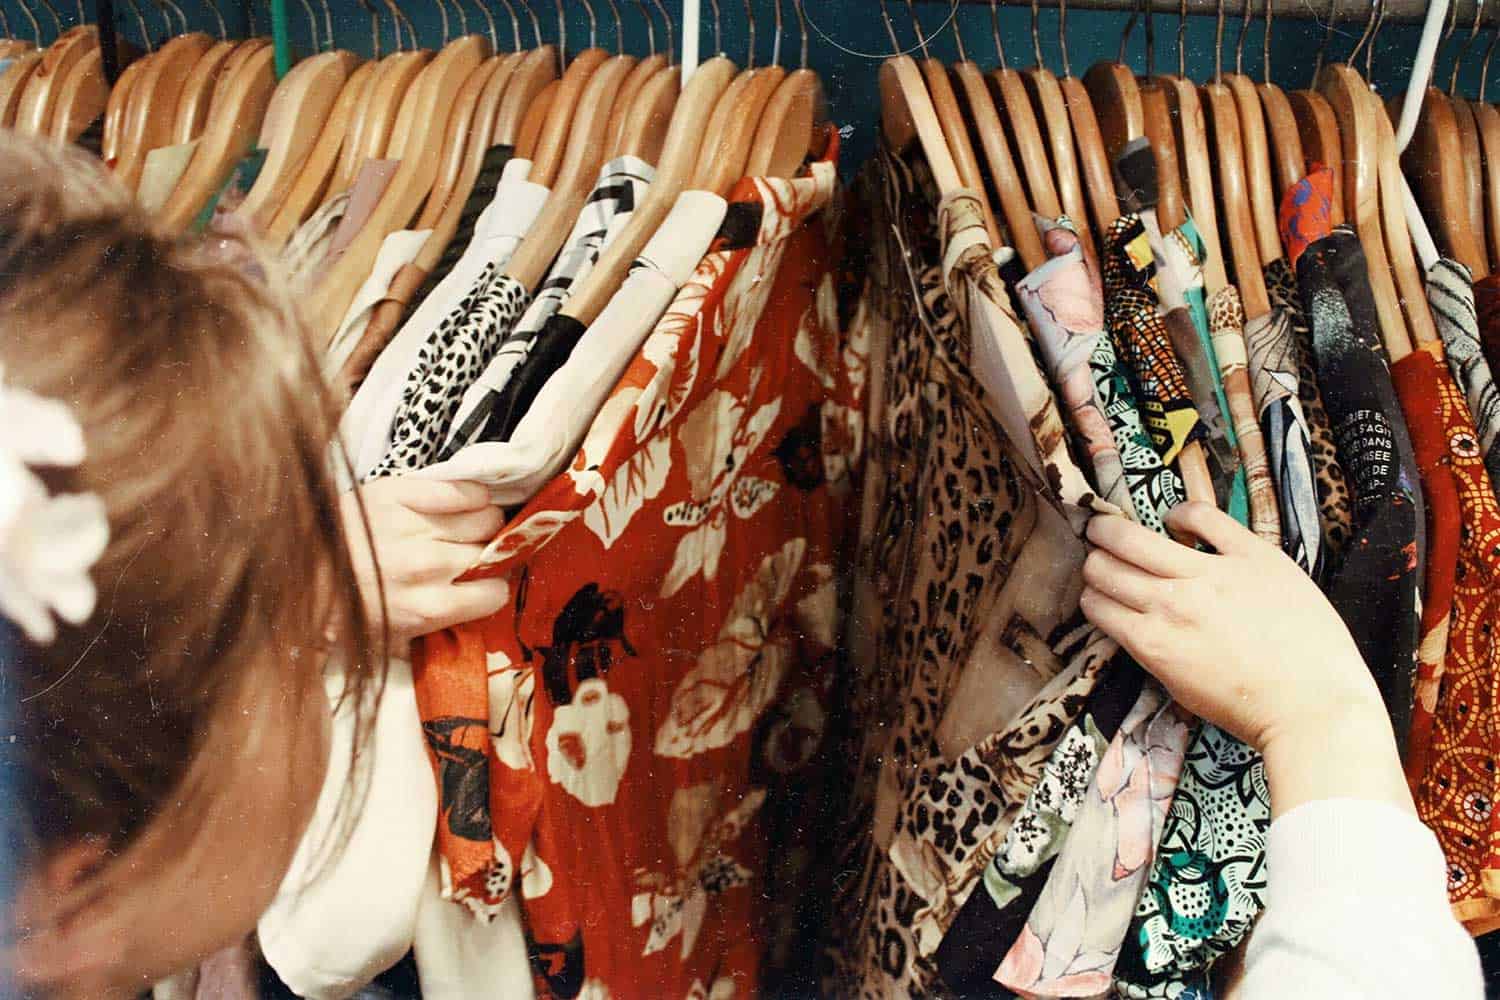 Girl searching through vintage clothes on a rail.